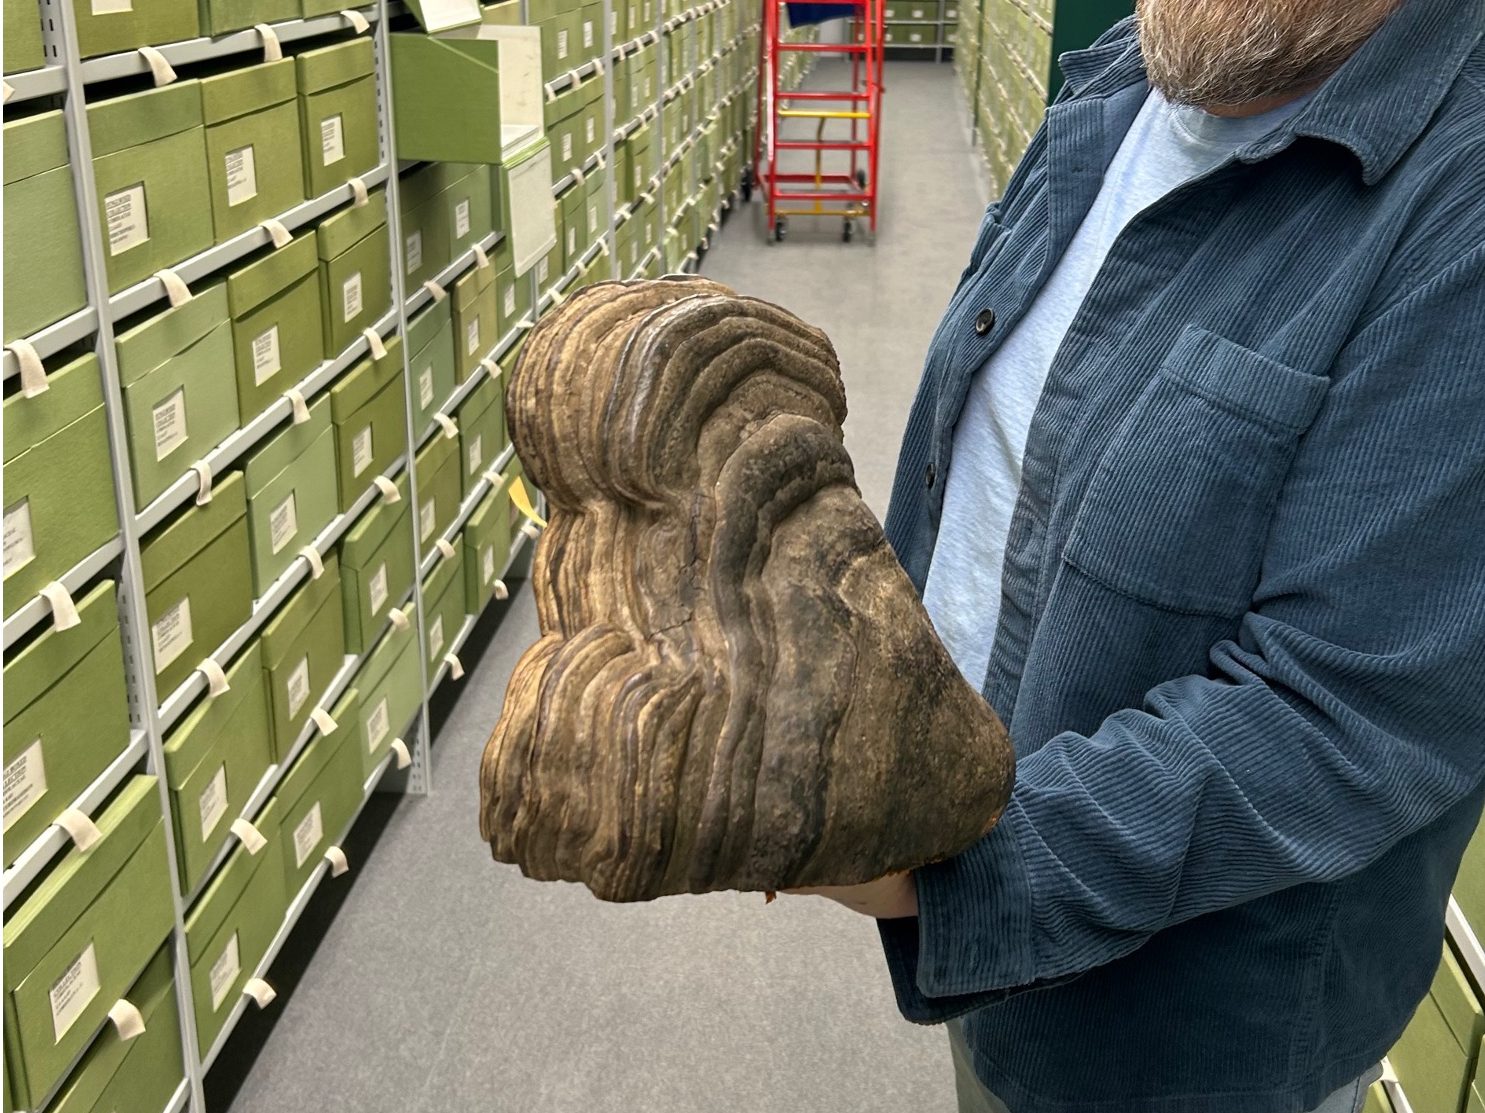 A man holding a mushroom inside a collection